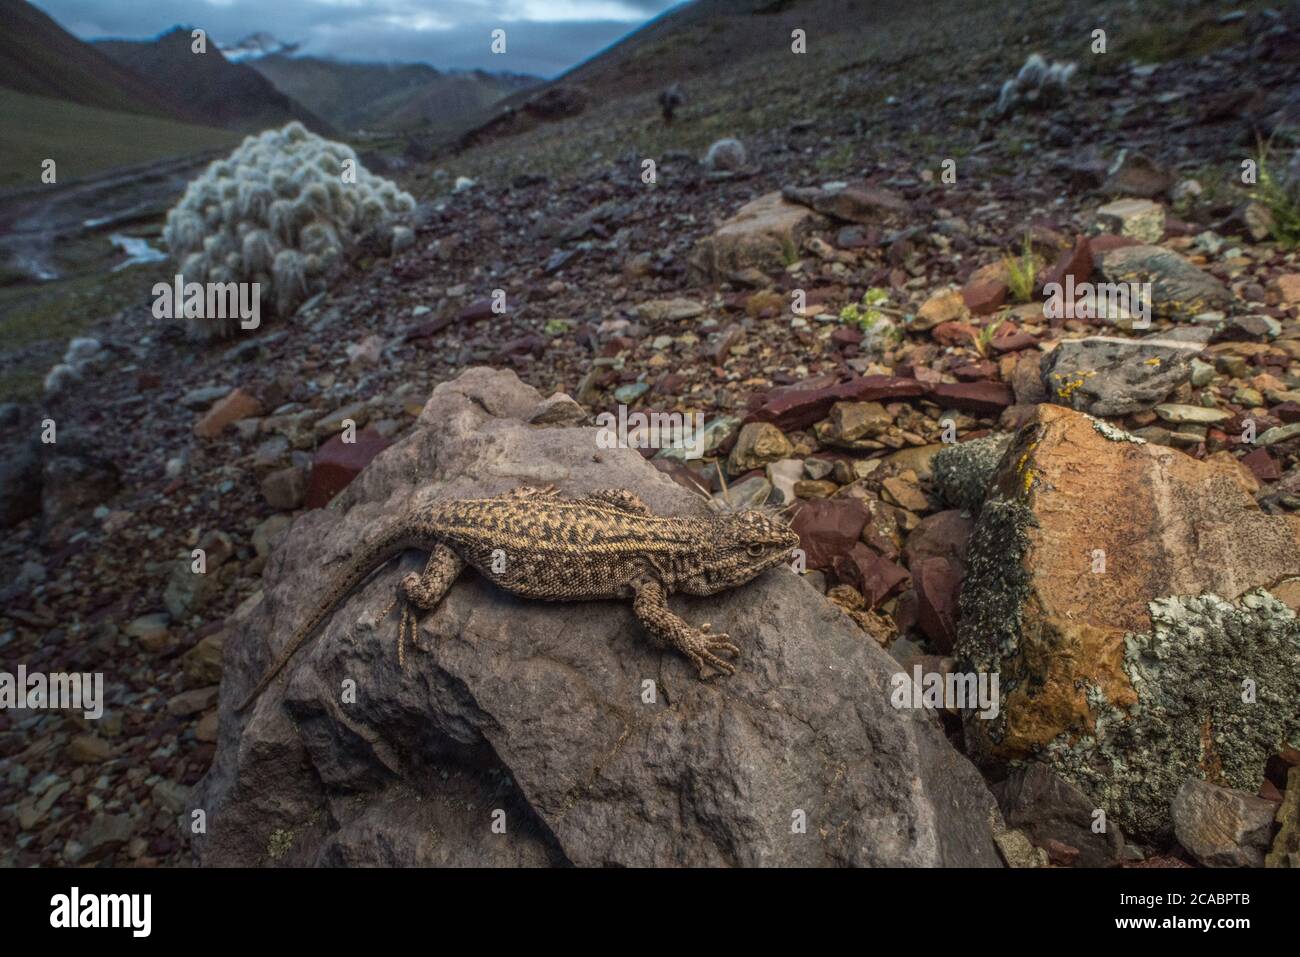 A Liolaemus lizard basks on a stone on a cold day high up in the Andes mountains where these lizards occur. Stock Photo